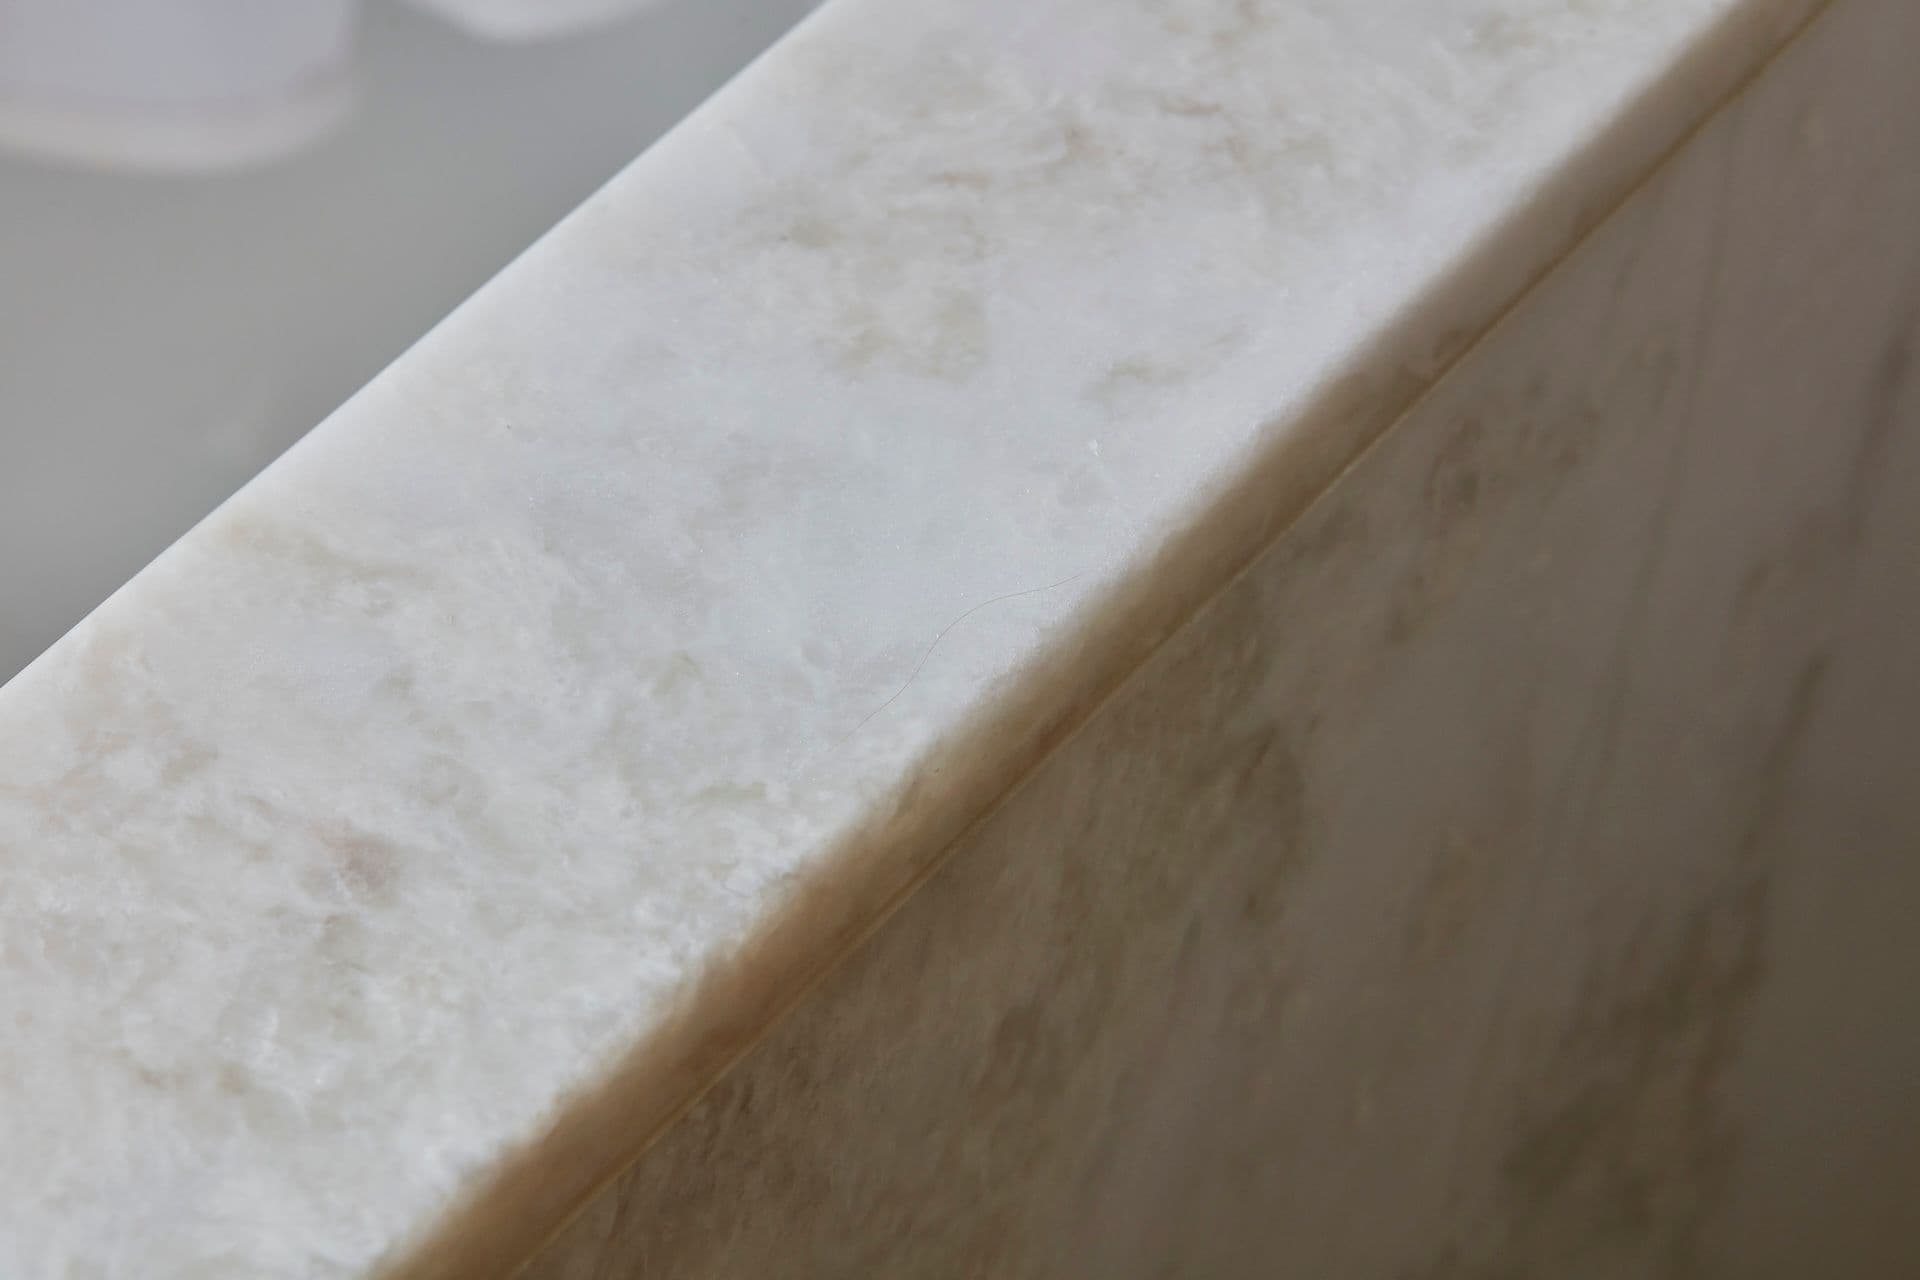 Details of the white Carrara marble installe din the bathroom